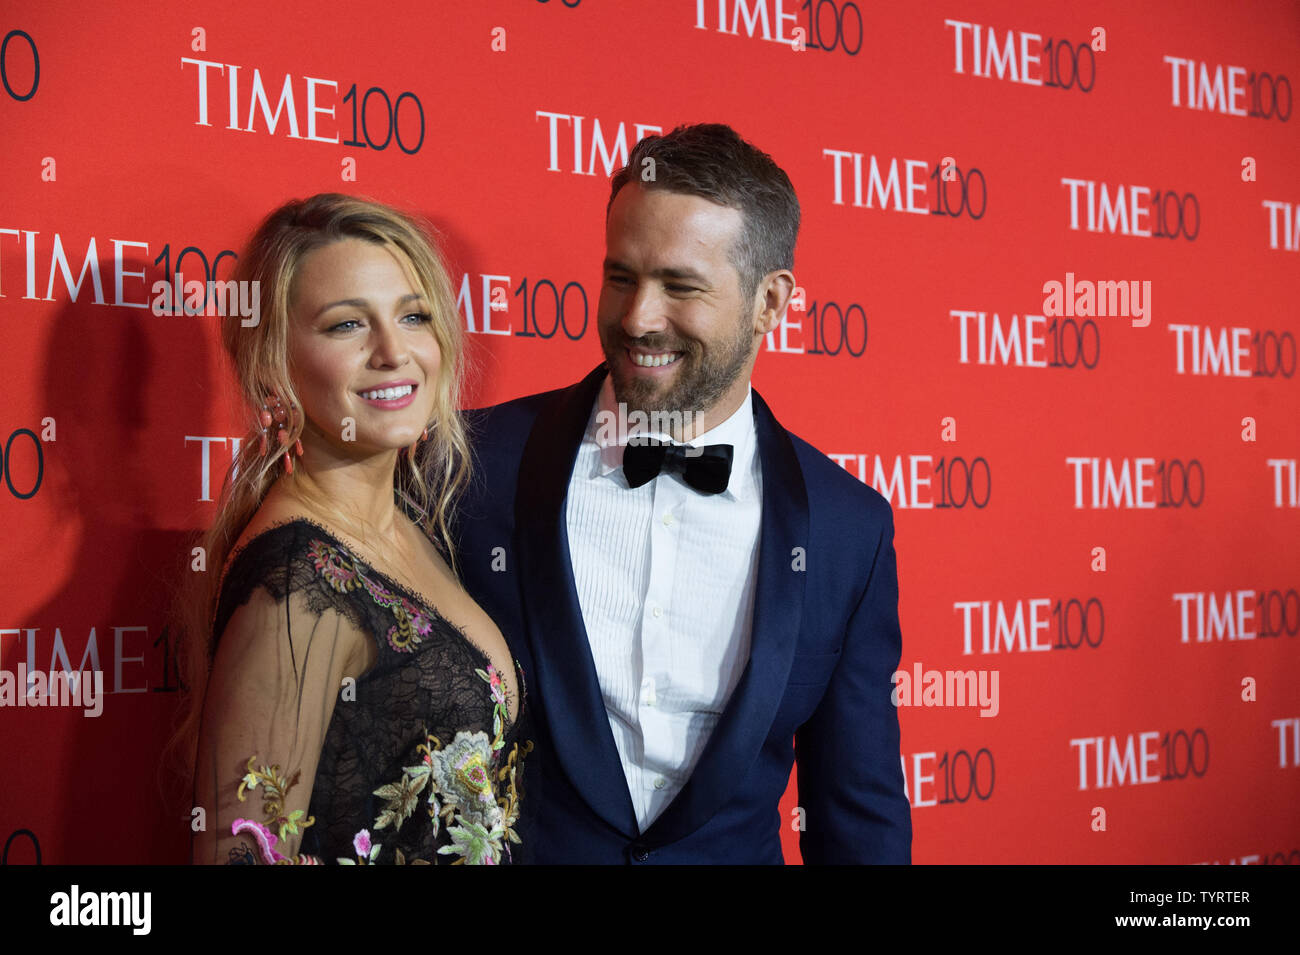 Blake Lively and Ryan Reynolds arrive on the red carpet at the TIME 100 Gala at Frederick P. Rose Hall, Home of Jazz at Lincoln Center, in New York City on April 26, 2017. TIME 100 celebrates TIME Magazine's list of the 100 Most Influential People in the World.      Photo by Bryan R. Smith/UPI Stock Photo